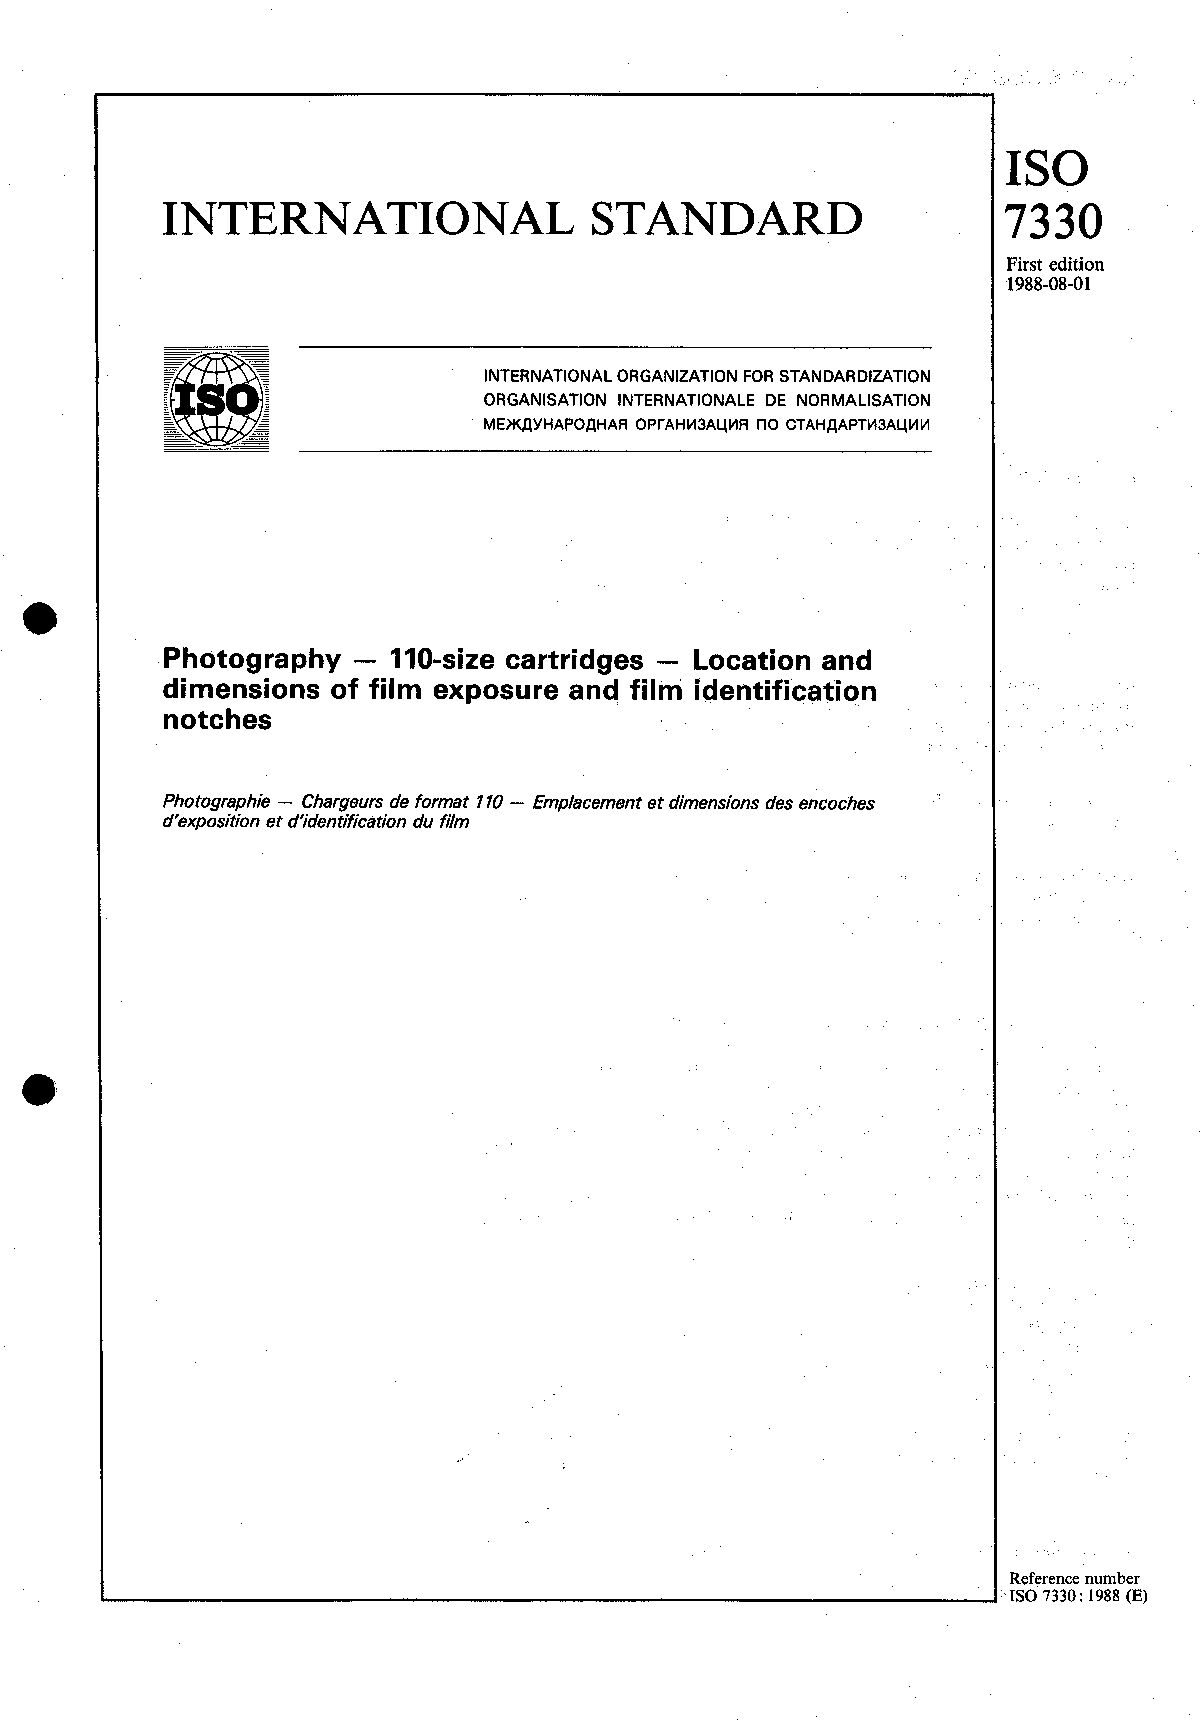 ISO 7330:1988